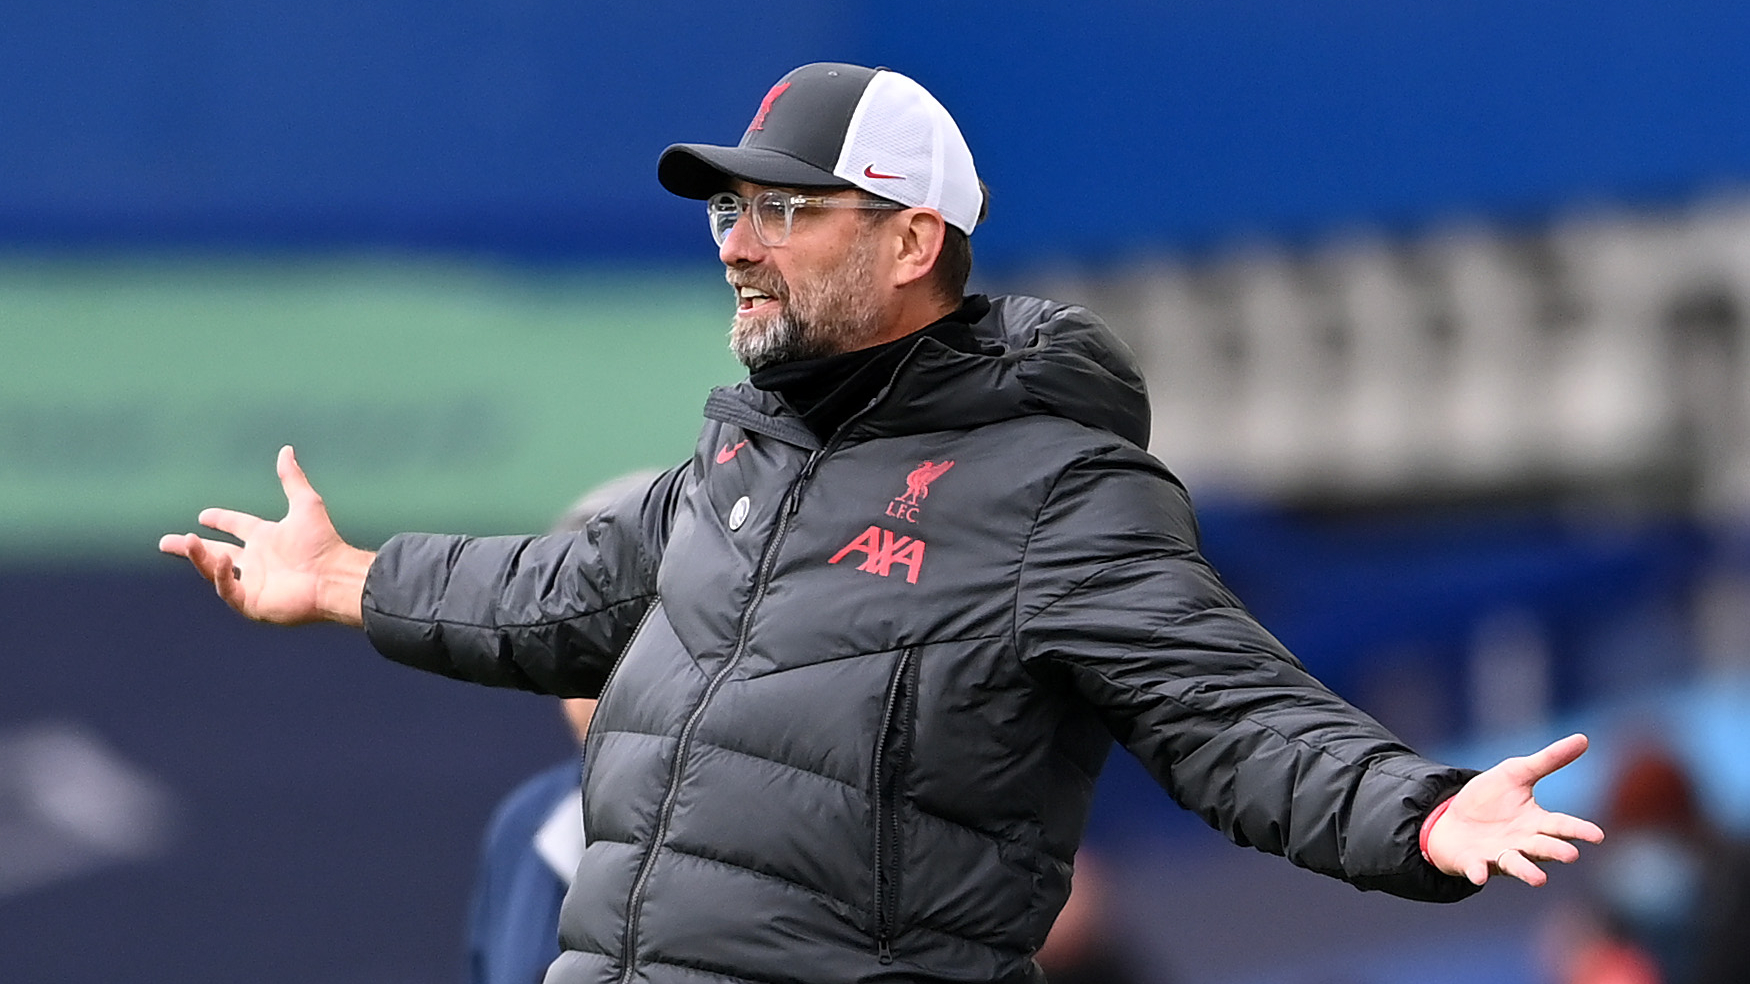 'Klopp doesn't look happy with football' - Liverpool boss adversely affected by VAR & substitutions controversy, says Lawrenson